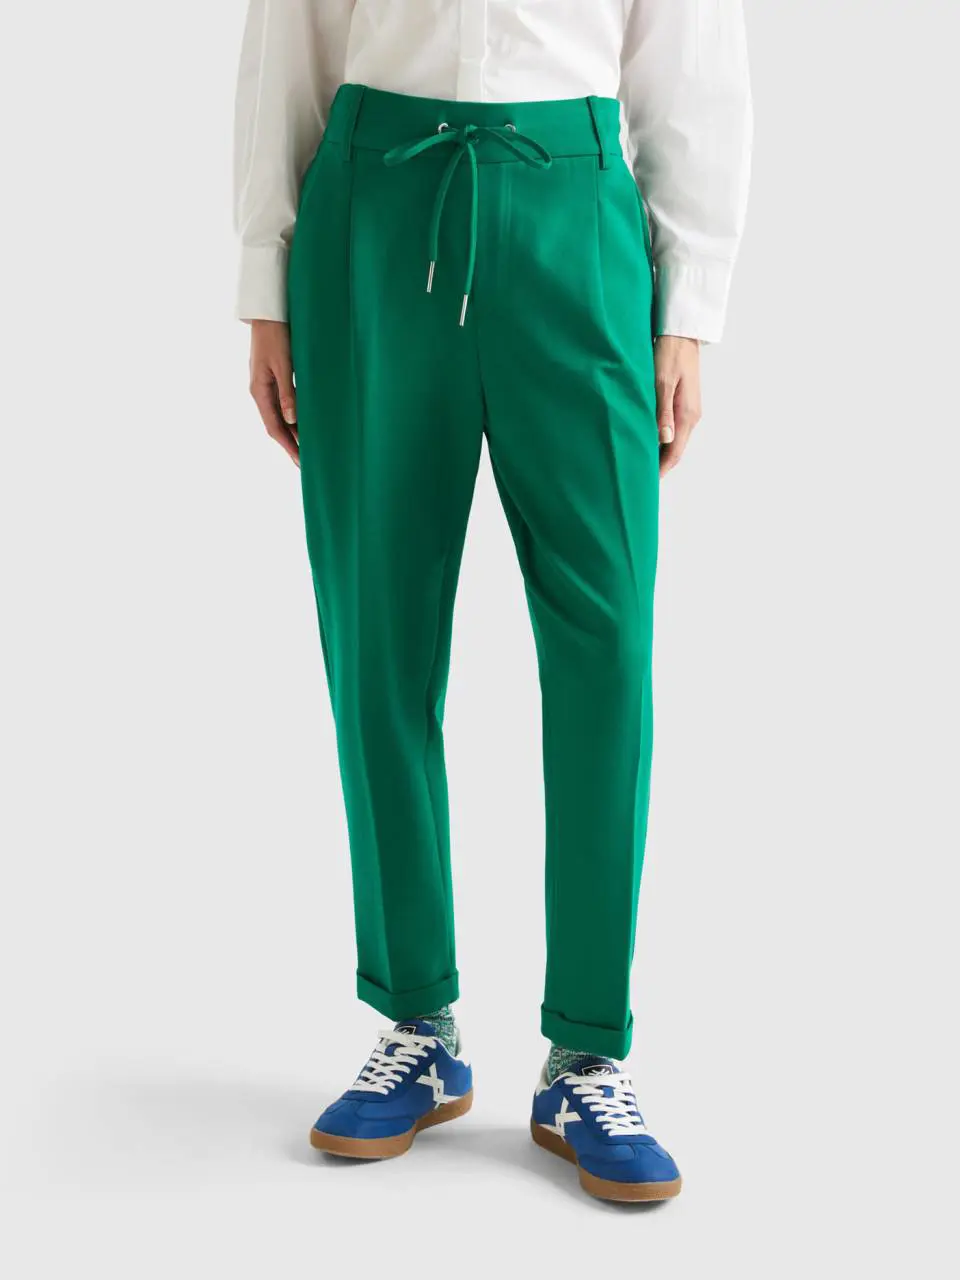 Benetton yarn dyed trousers with drawstring. 1